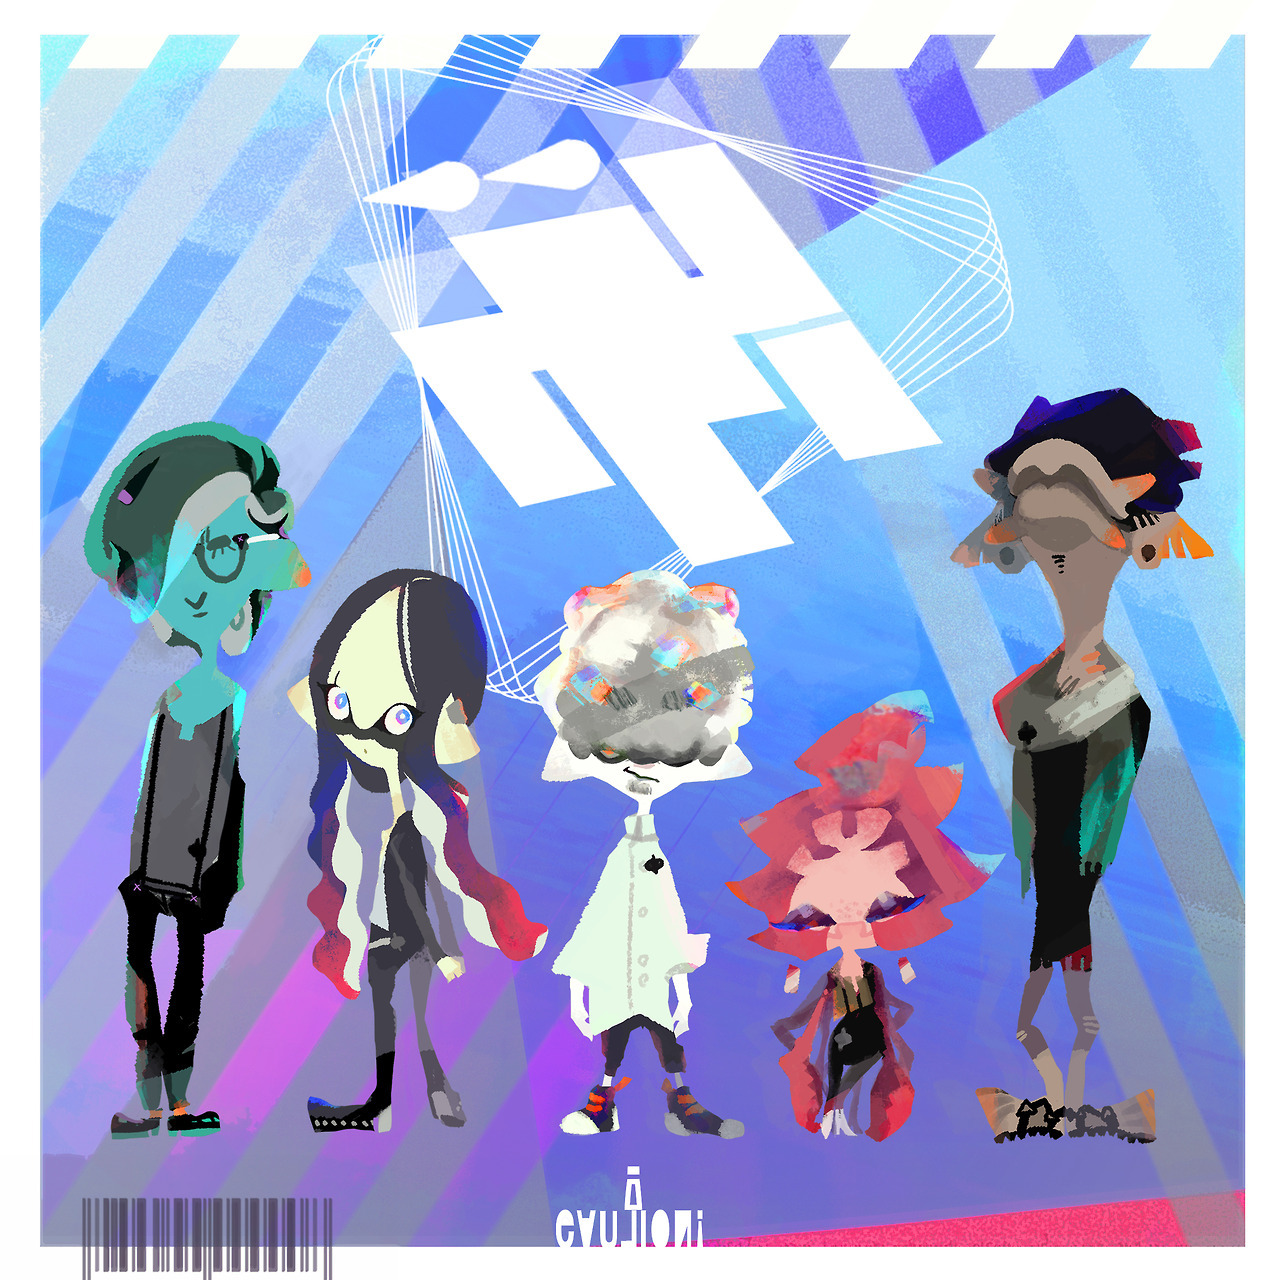 The rock band Wet Floor are the latest sensation in the Inkling world. Their songs are an enticing blend of different genres, and they’re especially popular with the kids right now. Let’s check out their song “Rip Entry,” which you’ll hear as...